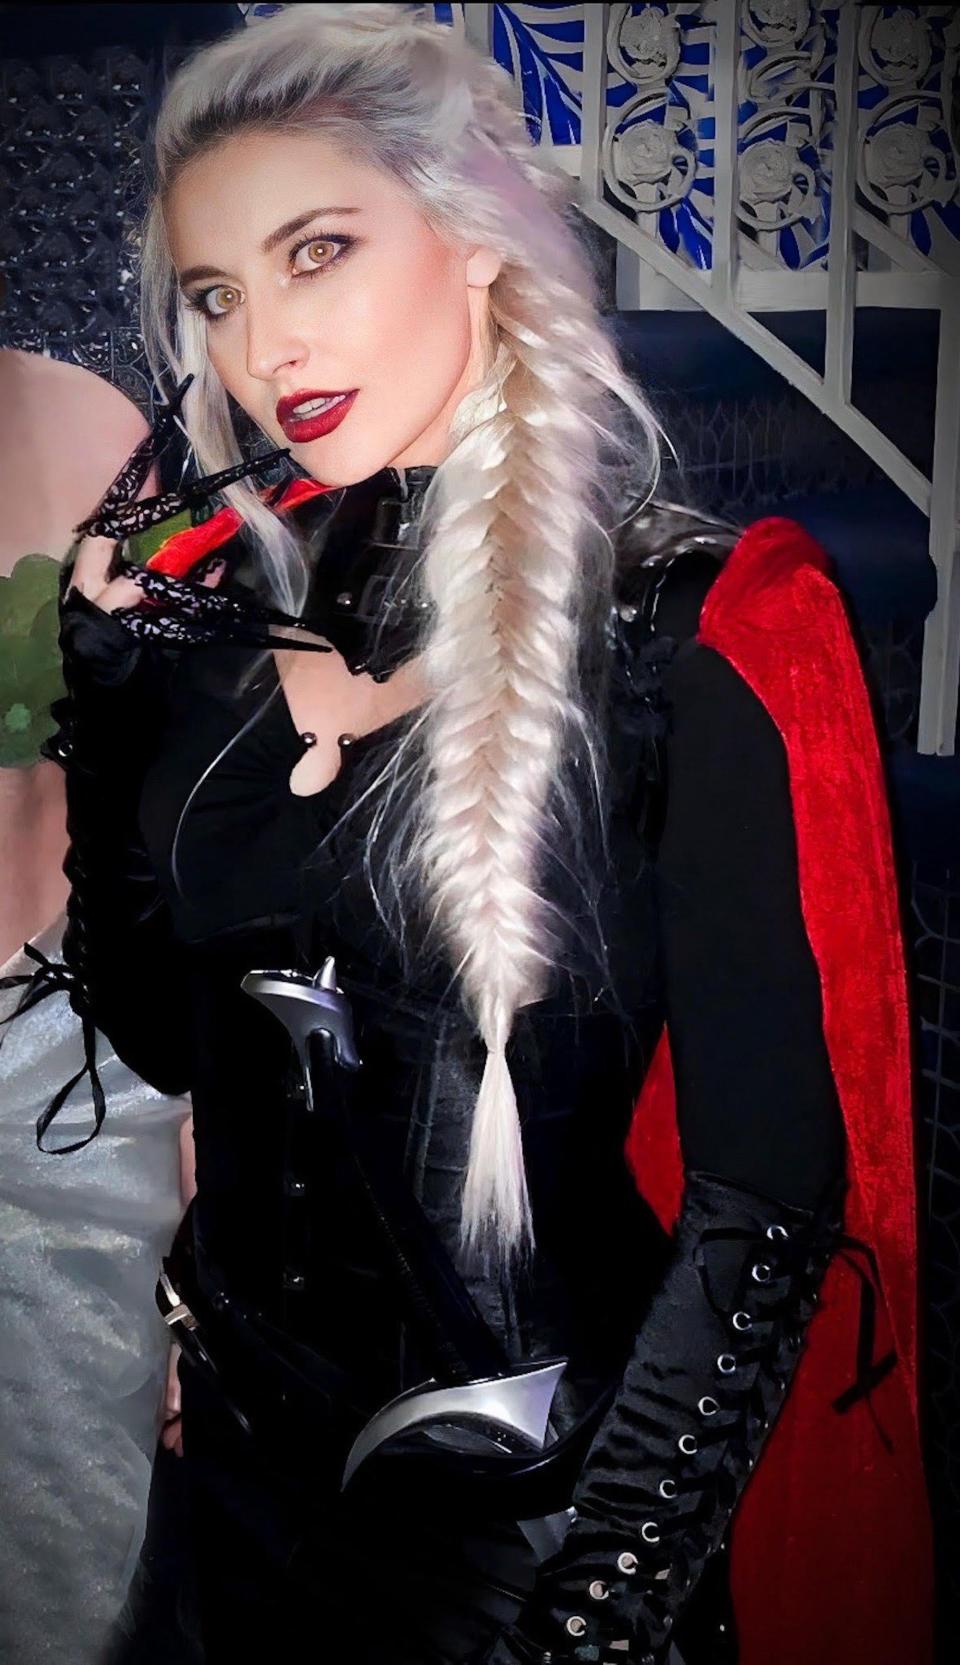 A woman with a long, blond braid holds up her hand, which has long nails. She wears a red cape.